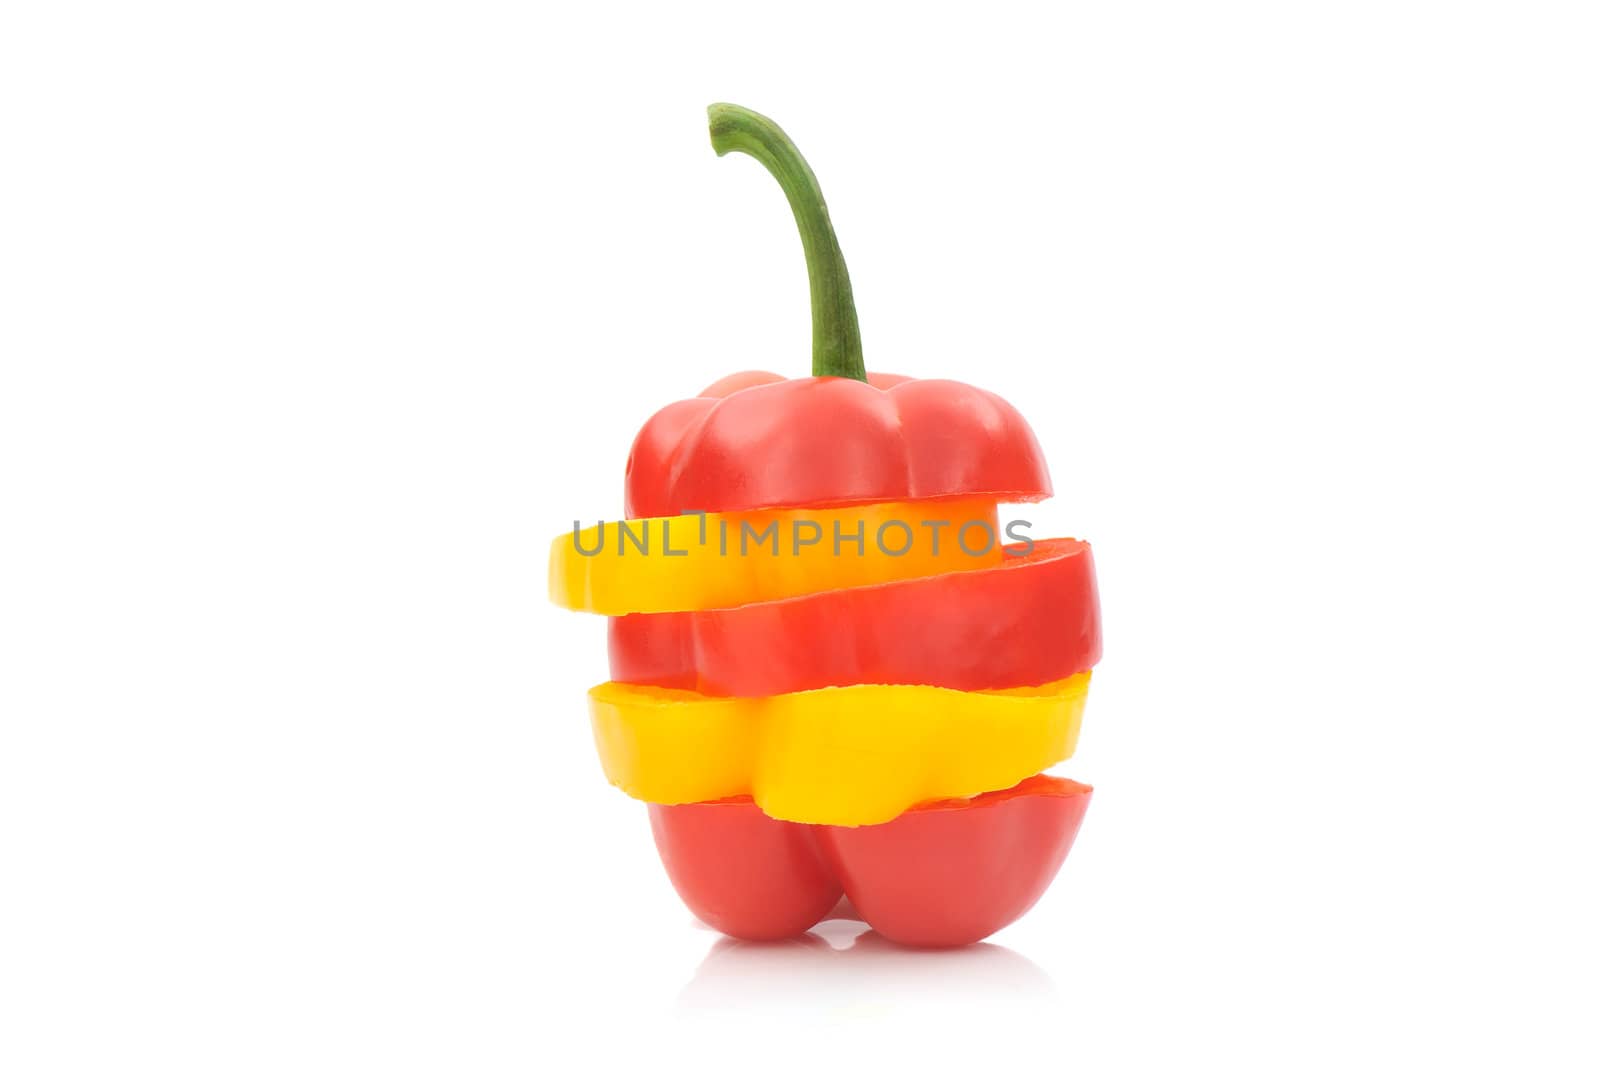 Piled yellow and red bell pepper slices on white background